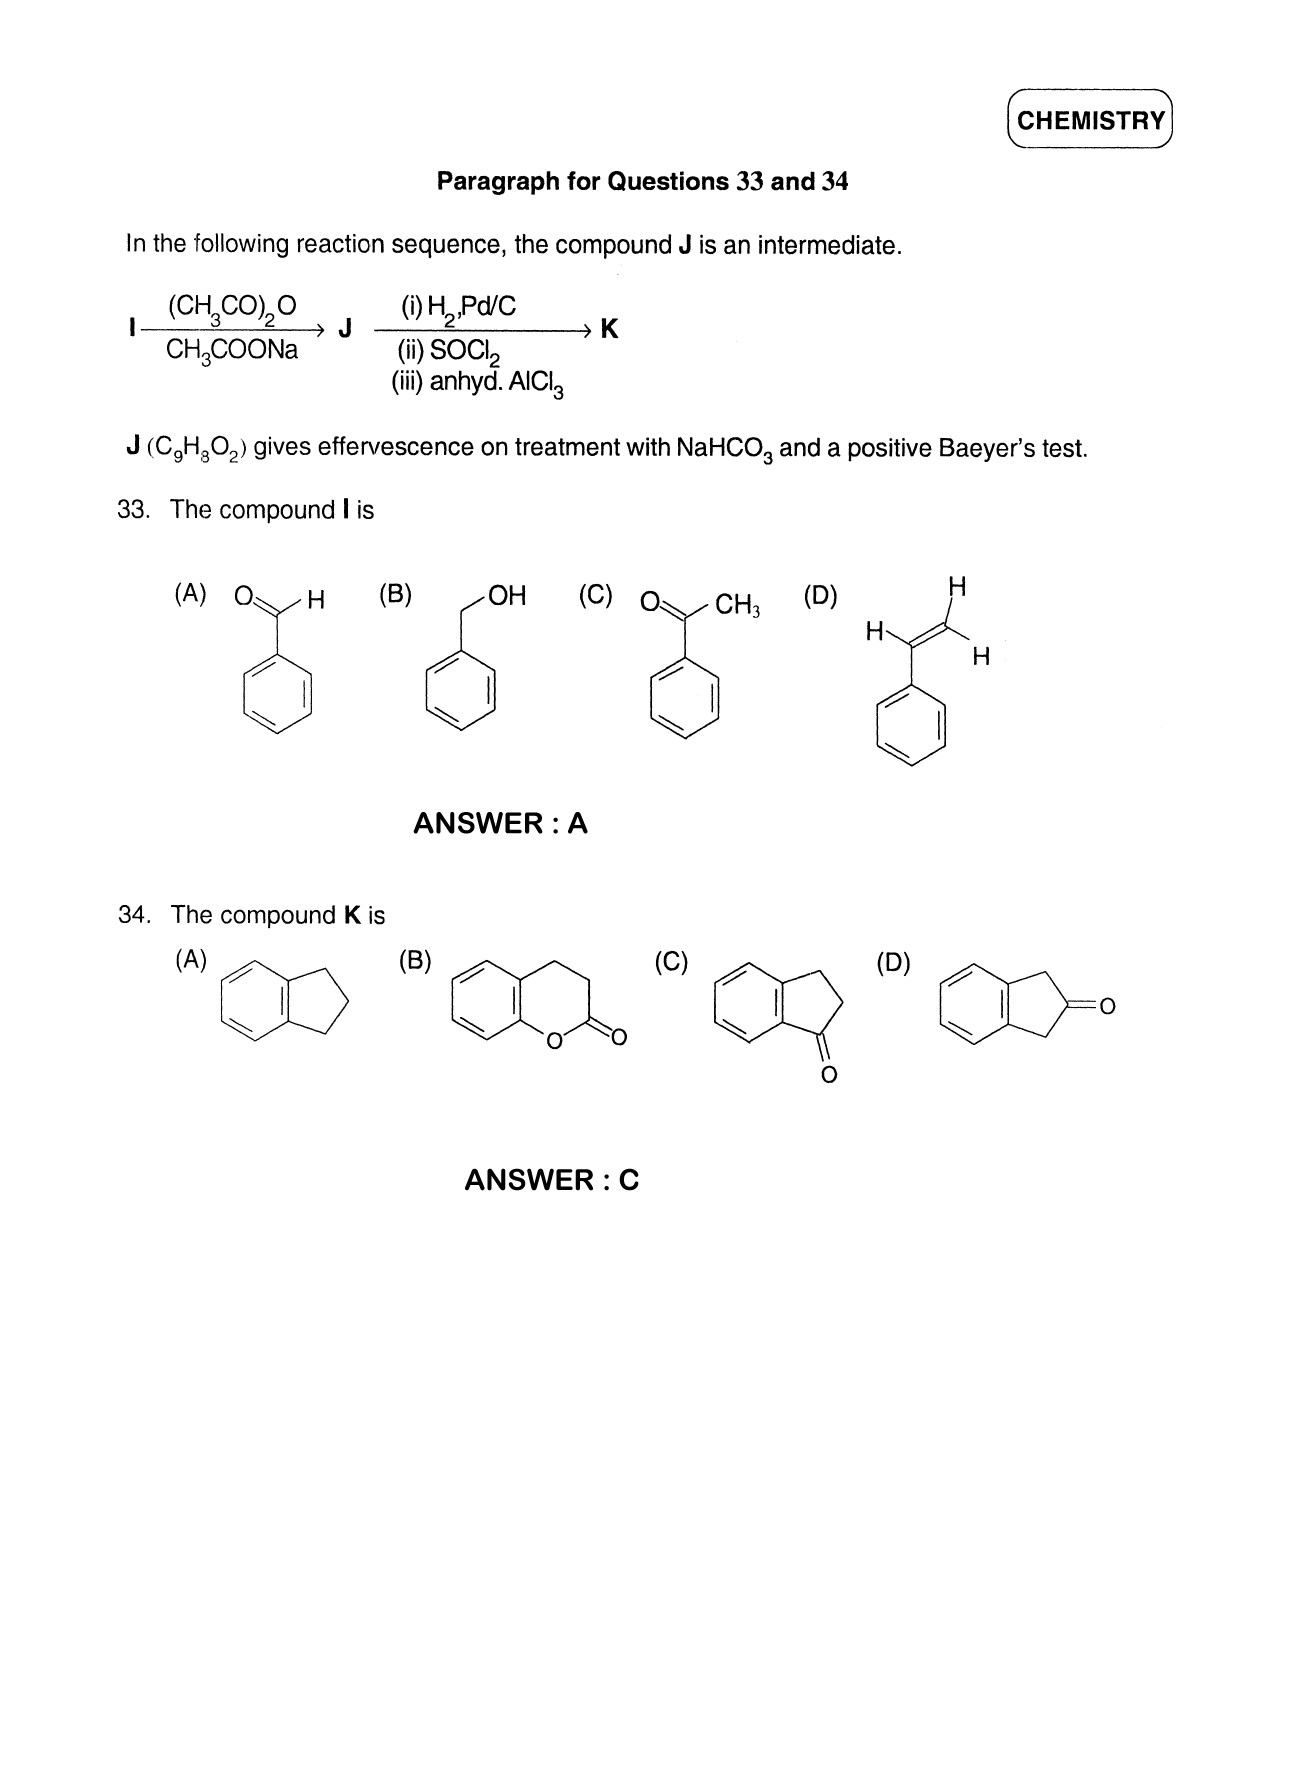 JEE Exam Question Paper 2012 Paper 2 Chemistry 6